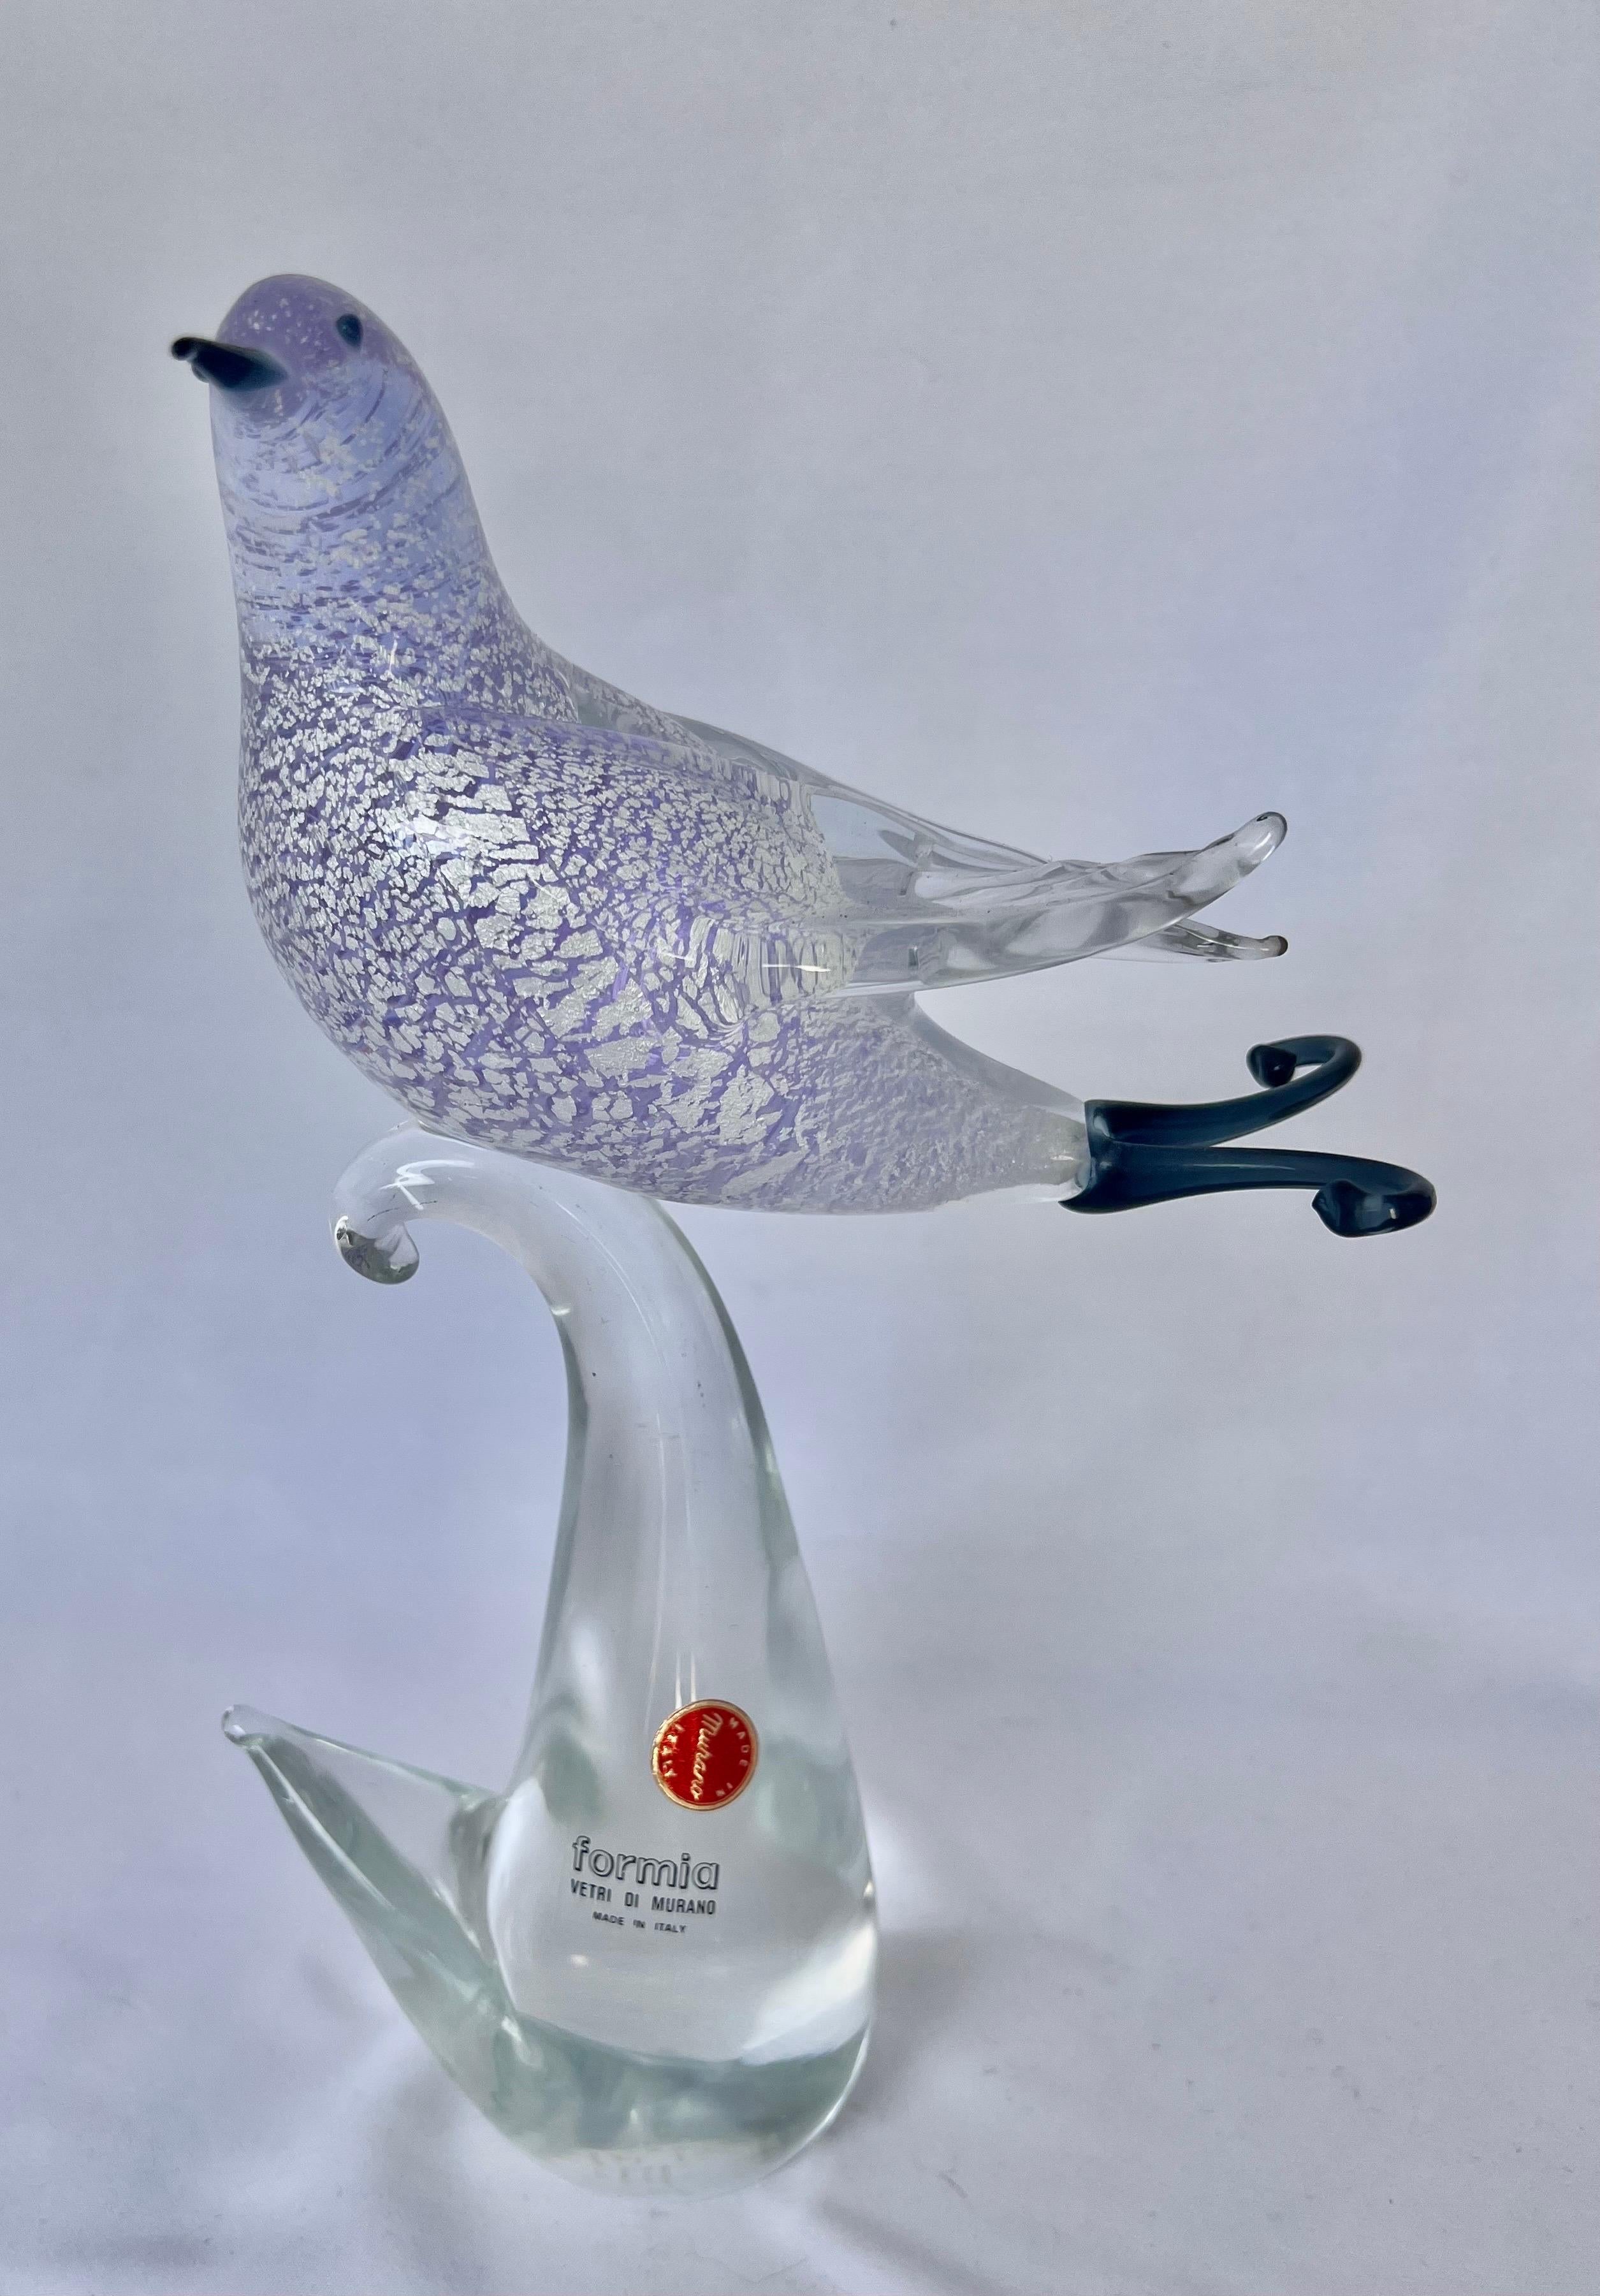 Vintage hand blown Formia Vetri Di MURANO glass bird in a lavender and silver coloration perched on a clear colored base. The glass bird still has it's Murano label.